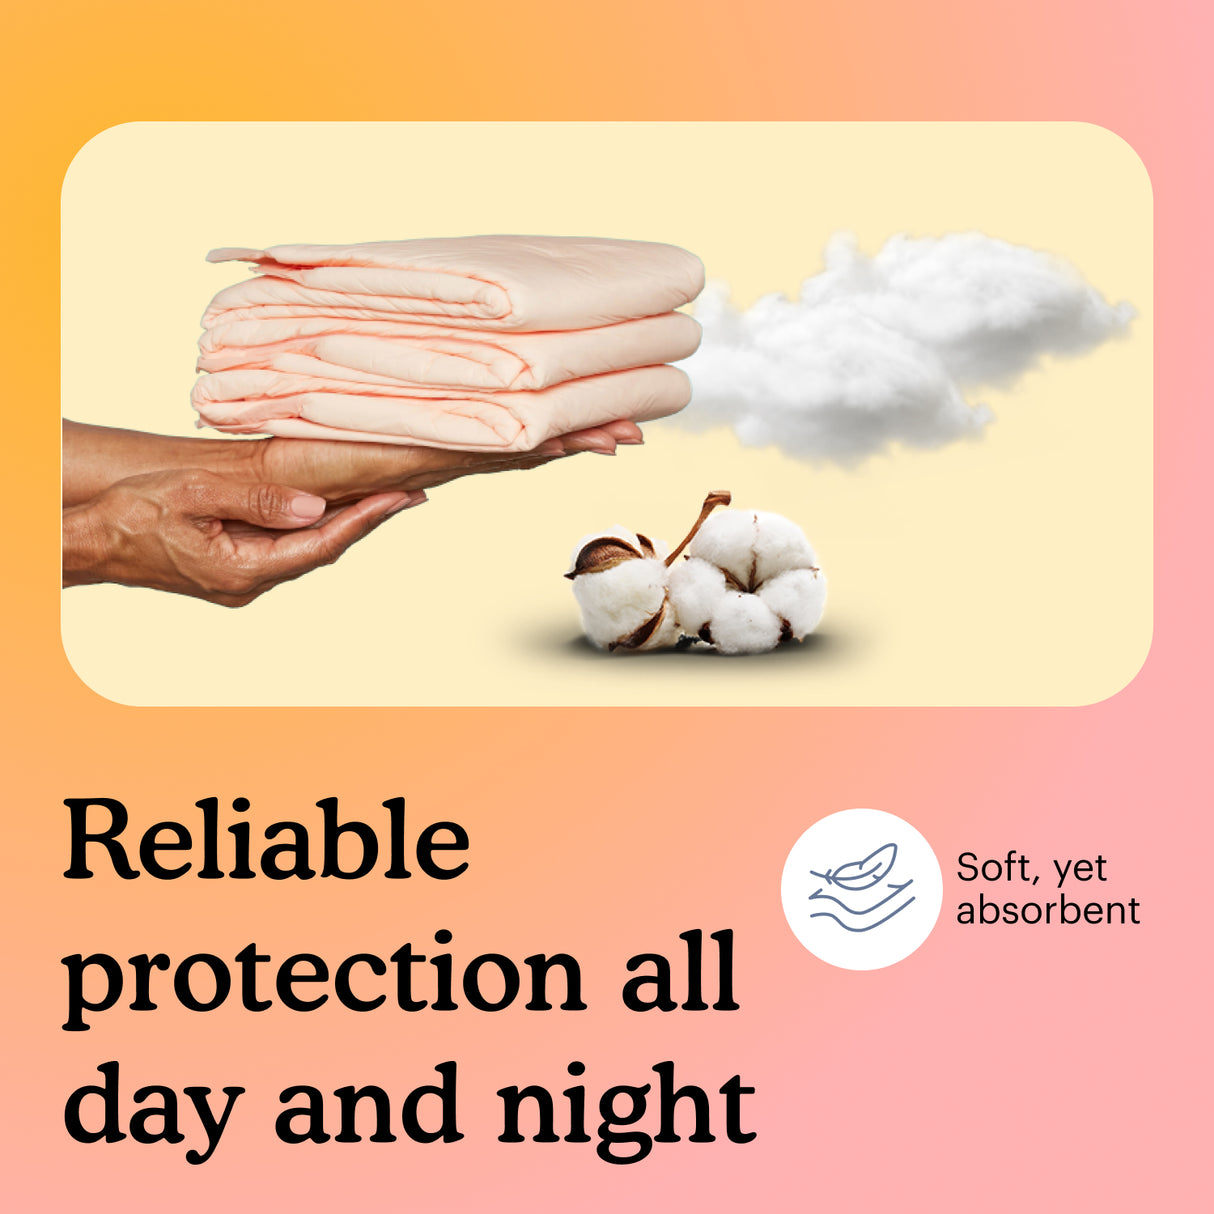 A hand holding a towel with cotton on it, featuring the words "reliable protection all day and night".